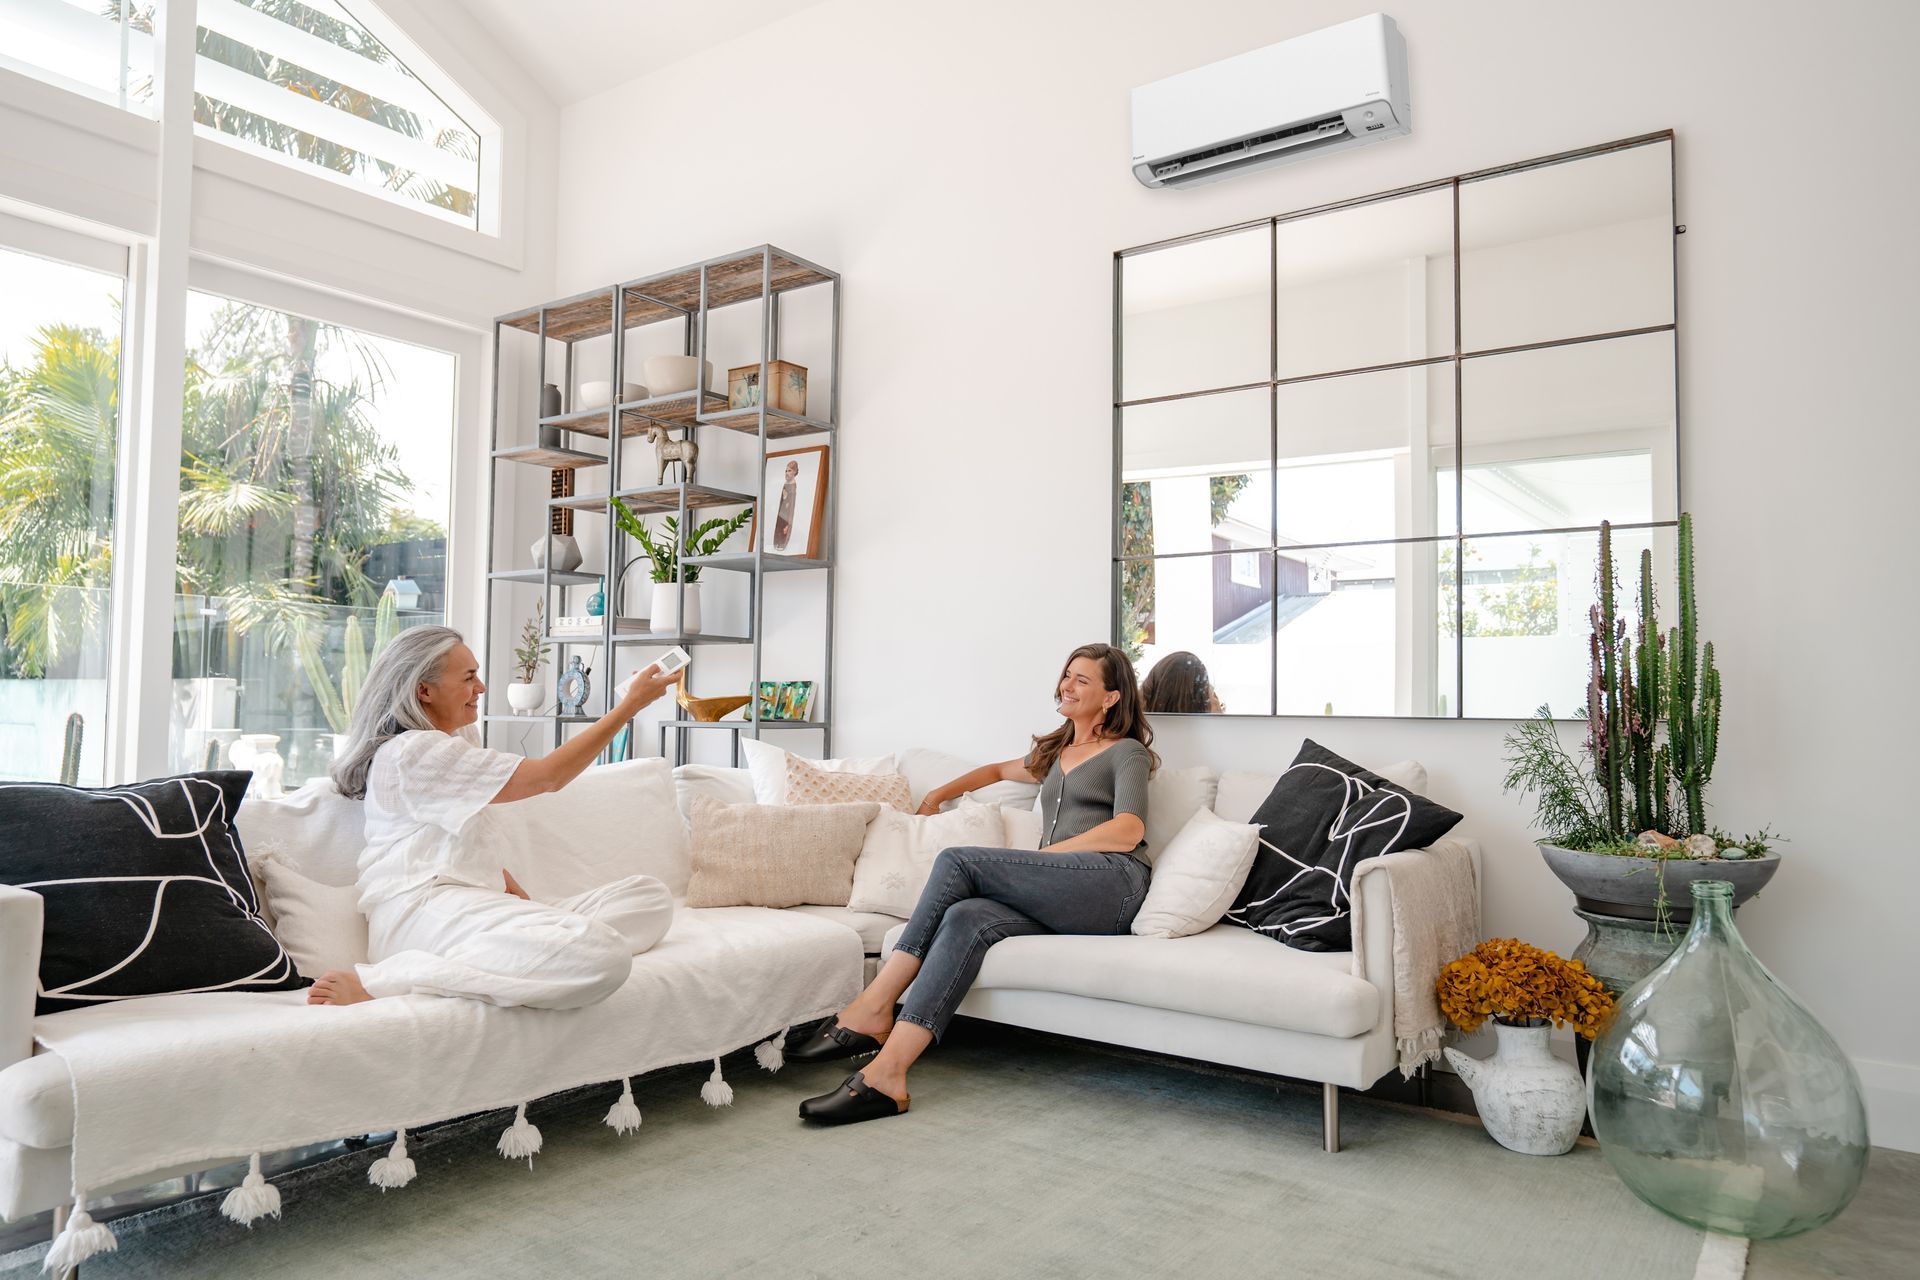 Daikin Alira heat pump/air conditioner being used with remote control in living room